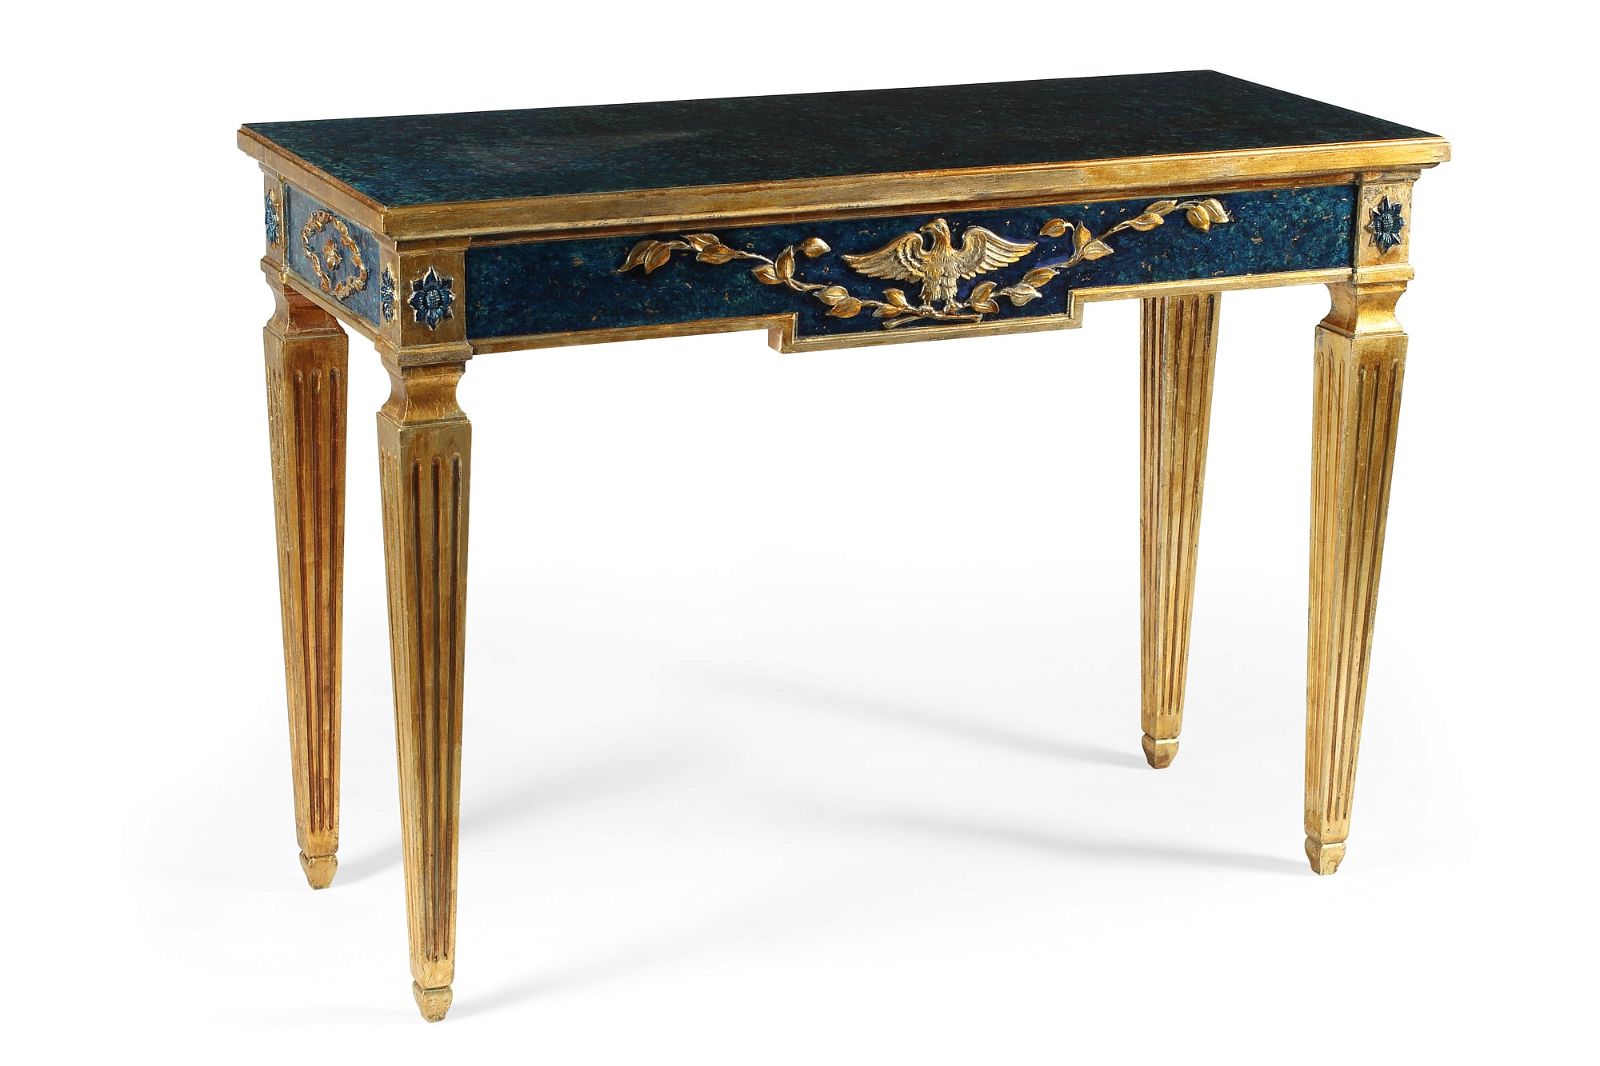 A CONTINENTAL NEOCLASSICAL CONSOLE